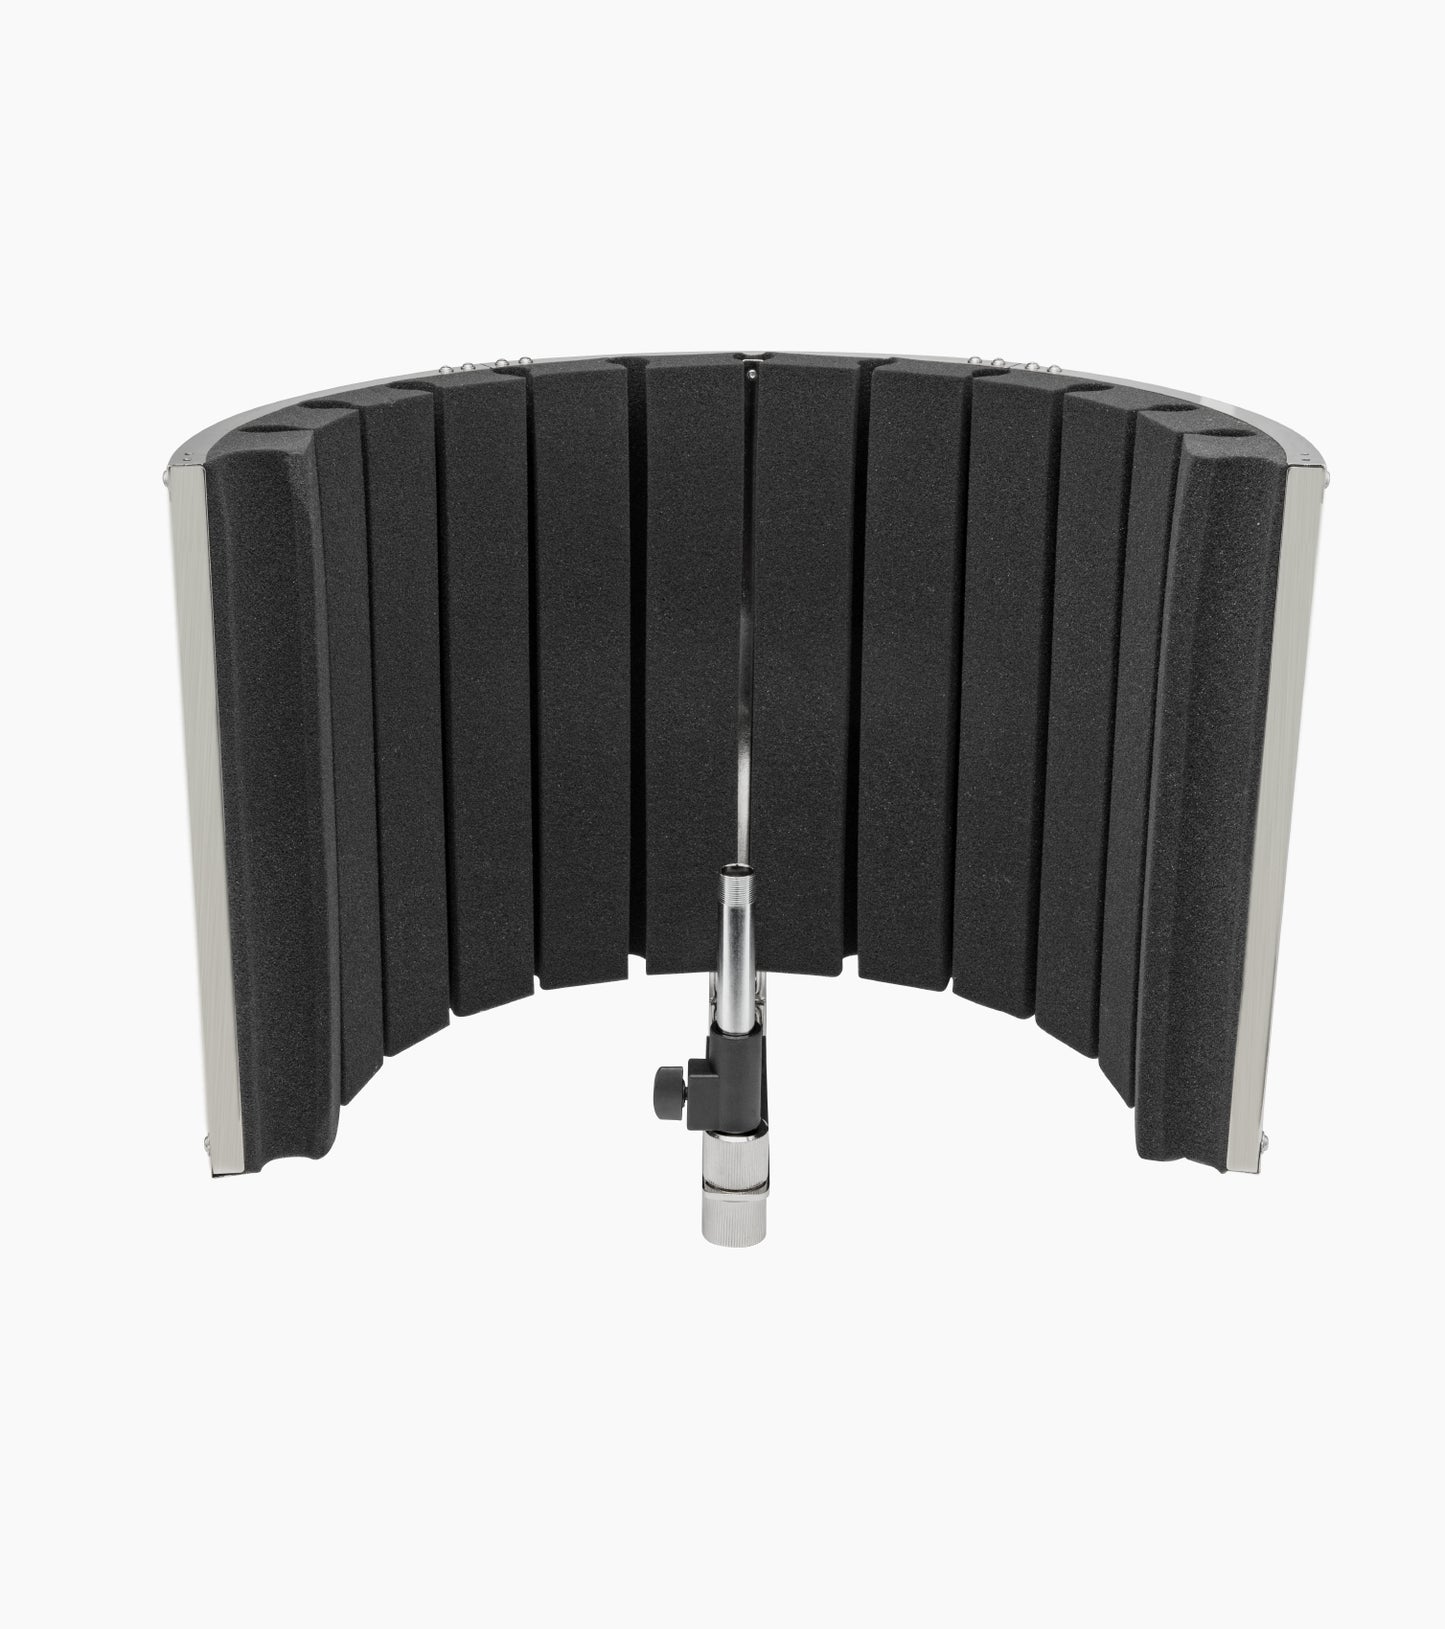  Sound Absorbing Vocal Shield - Front